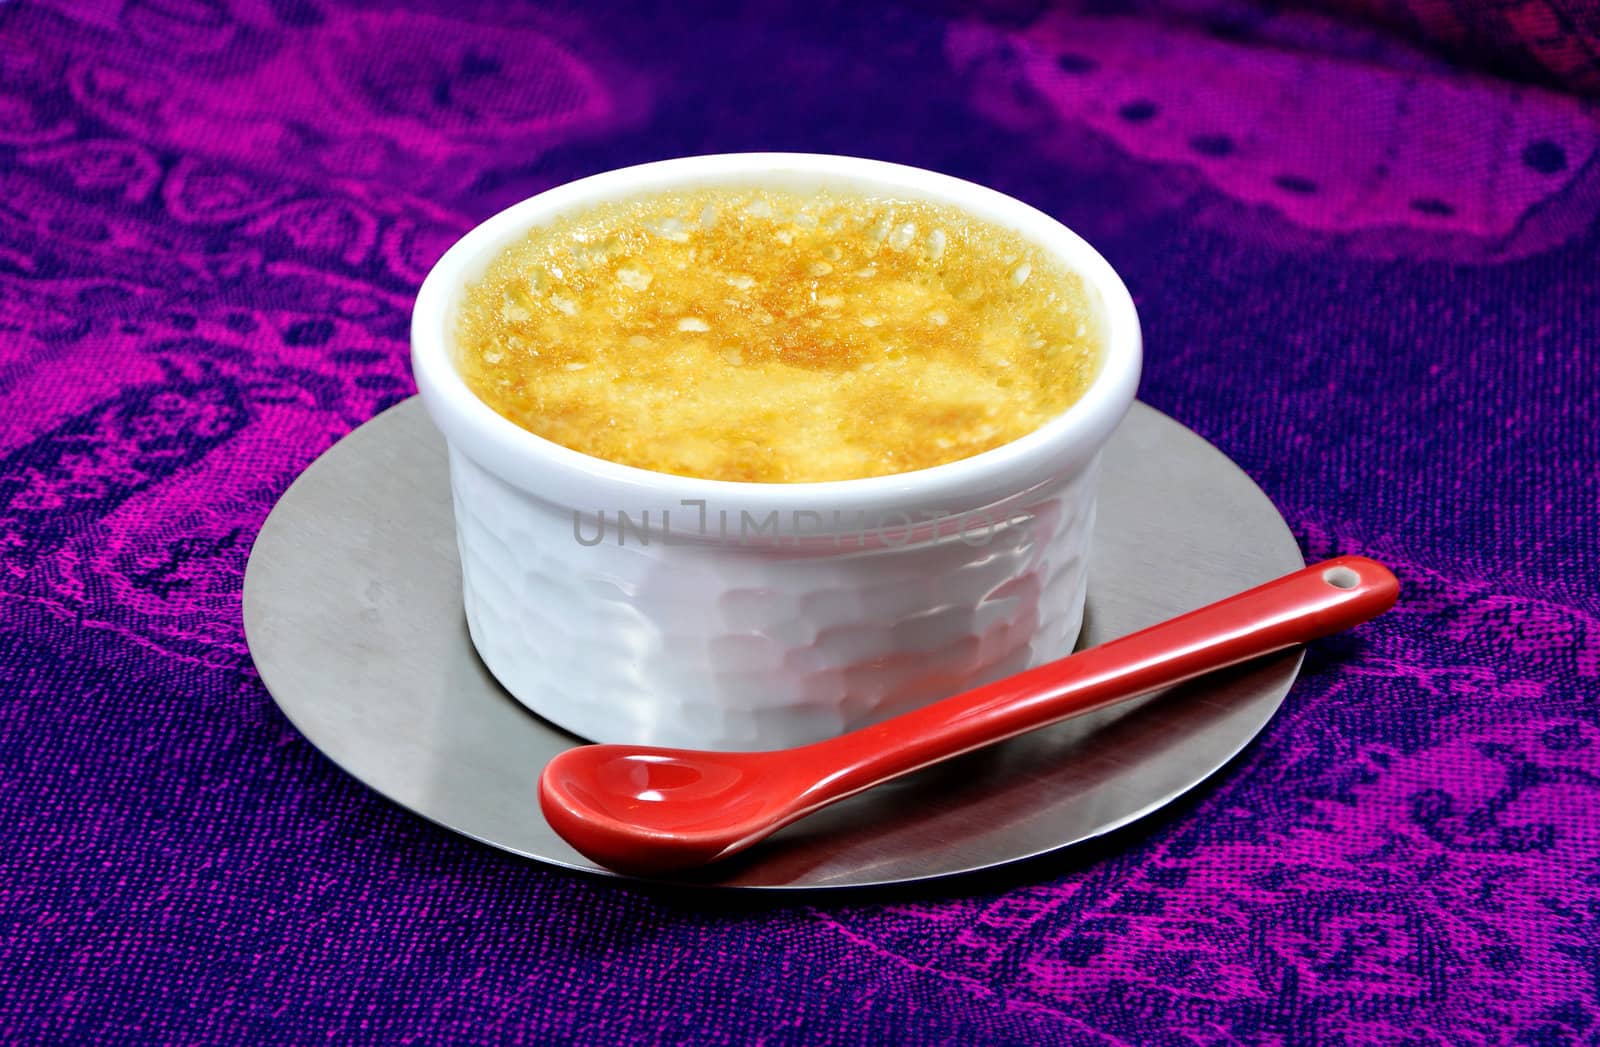 Home-made custard with a red ceramic spoon and an iron steel saucer on a purple tablecloth